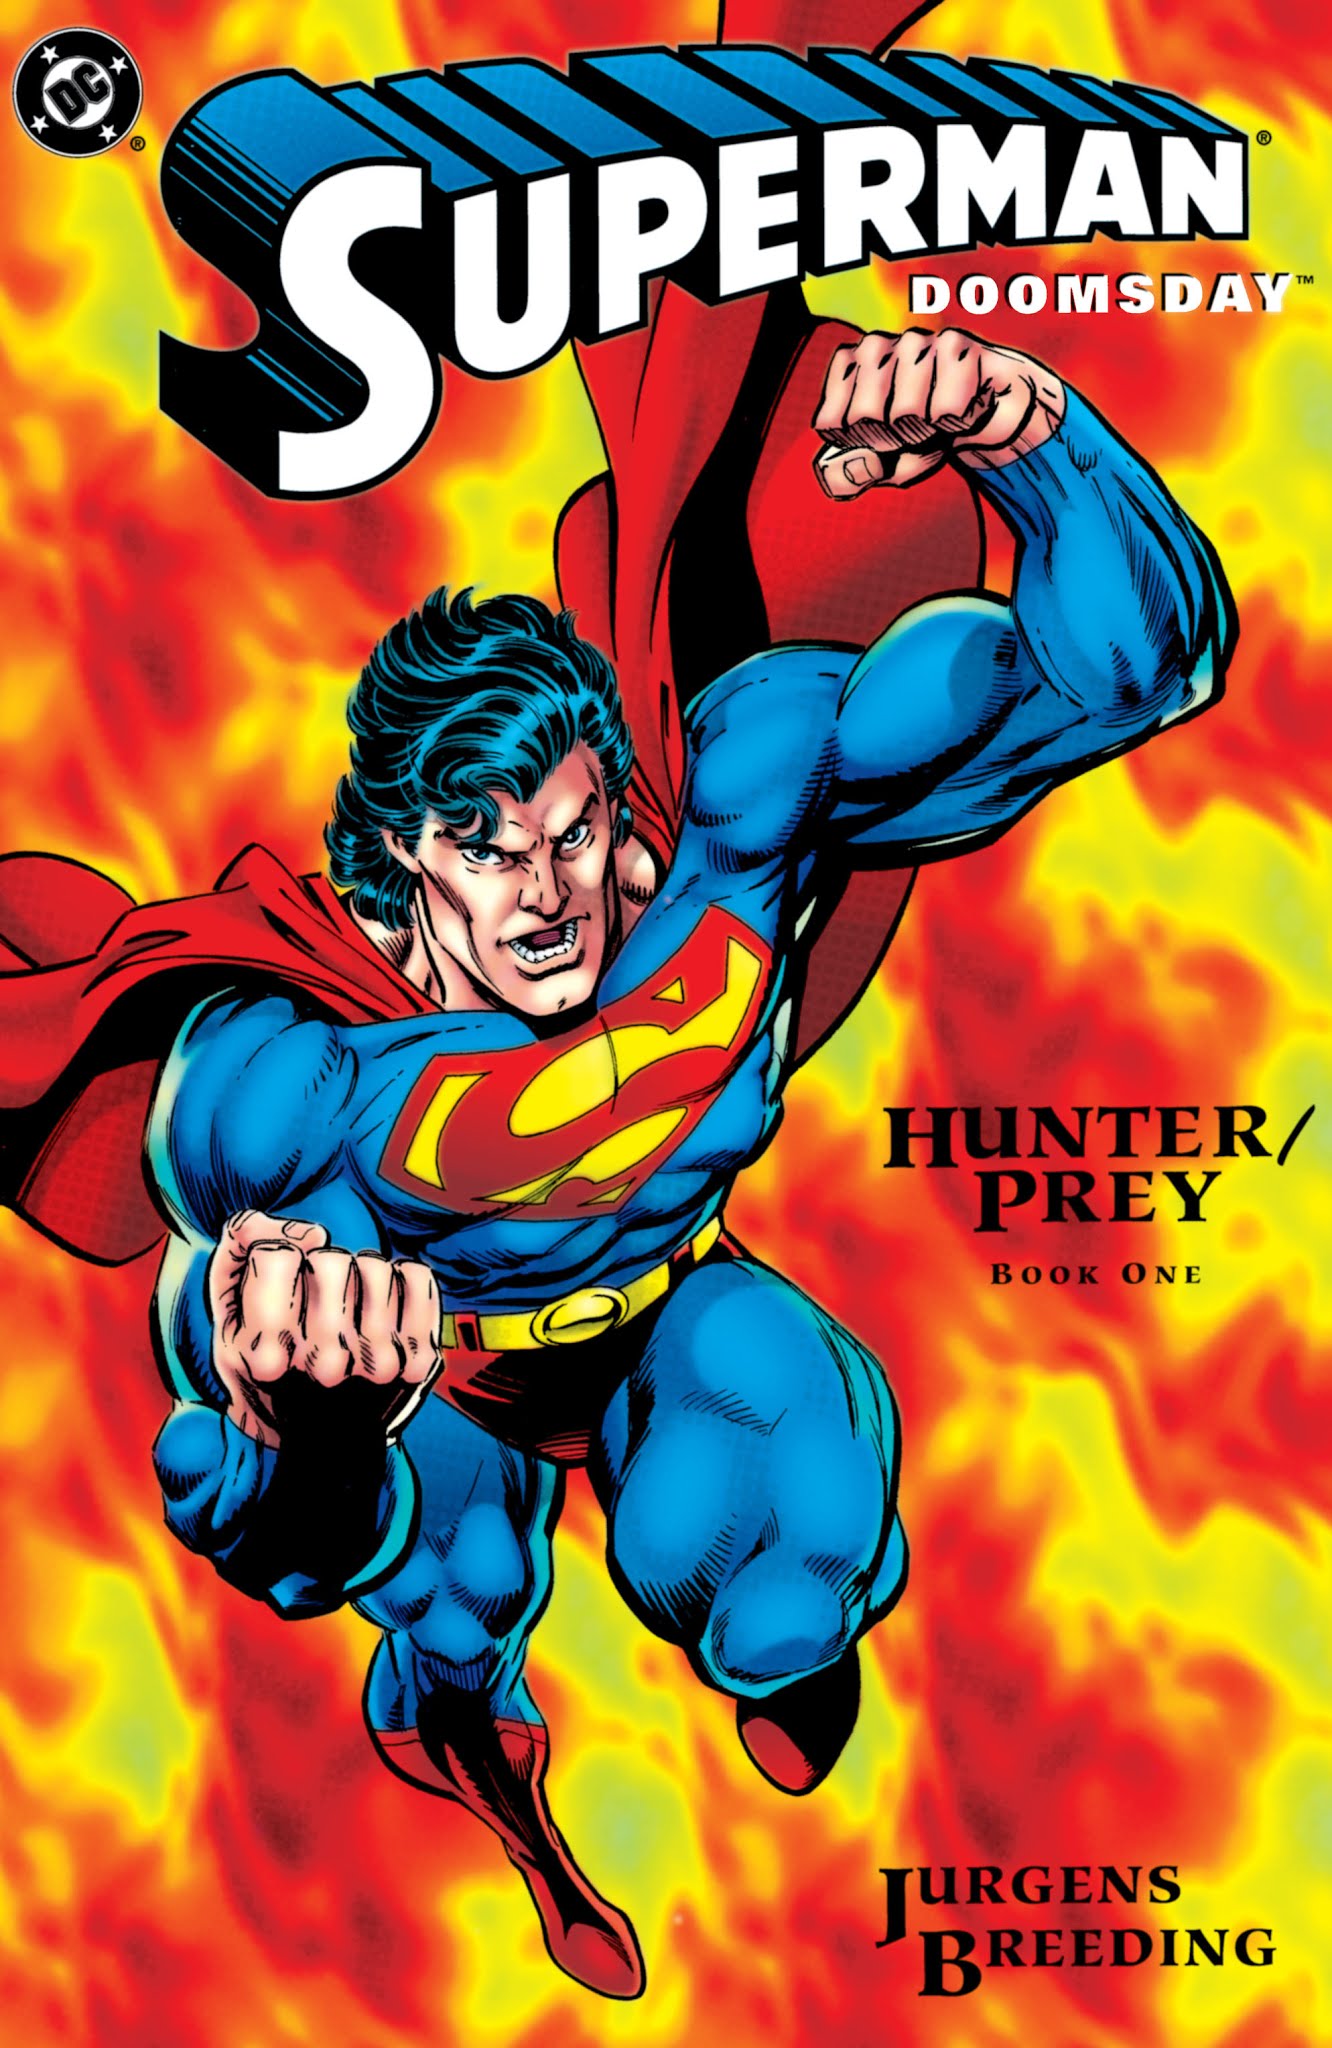 Read online Superman: Doomsday comic -  Issue # TPB - 6